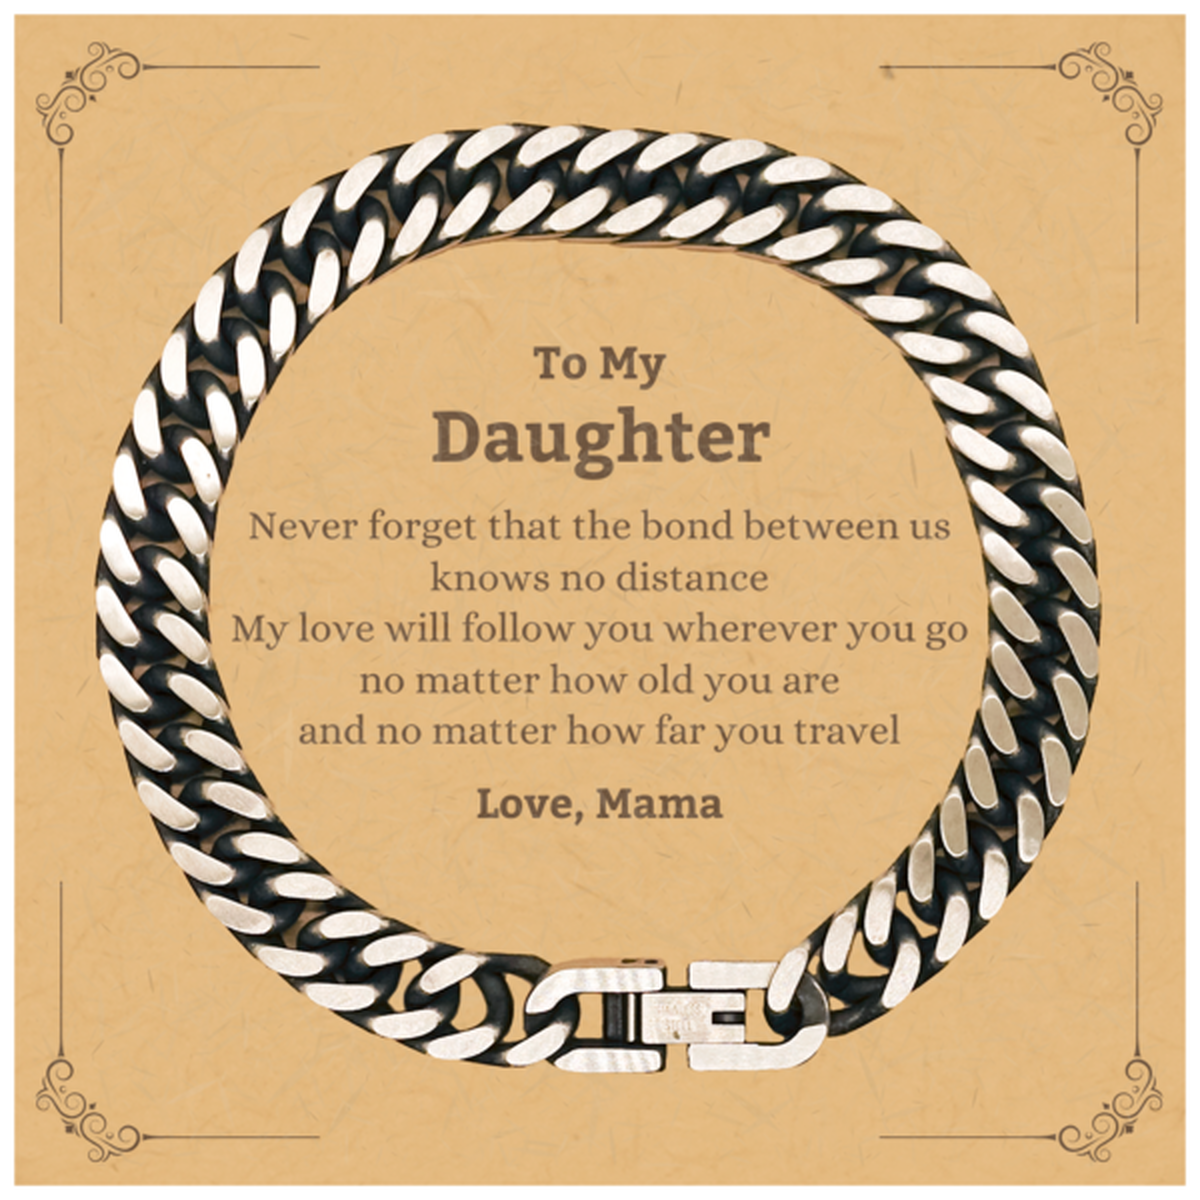 Daughter Birthday Gifts from Mama, Adjustable Cuban Link Chain Bracelet for Daughter Christmas Graduation Unique Gifts Daughter Never forget that the bond between us knows no distance. Love, Mama